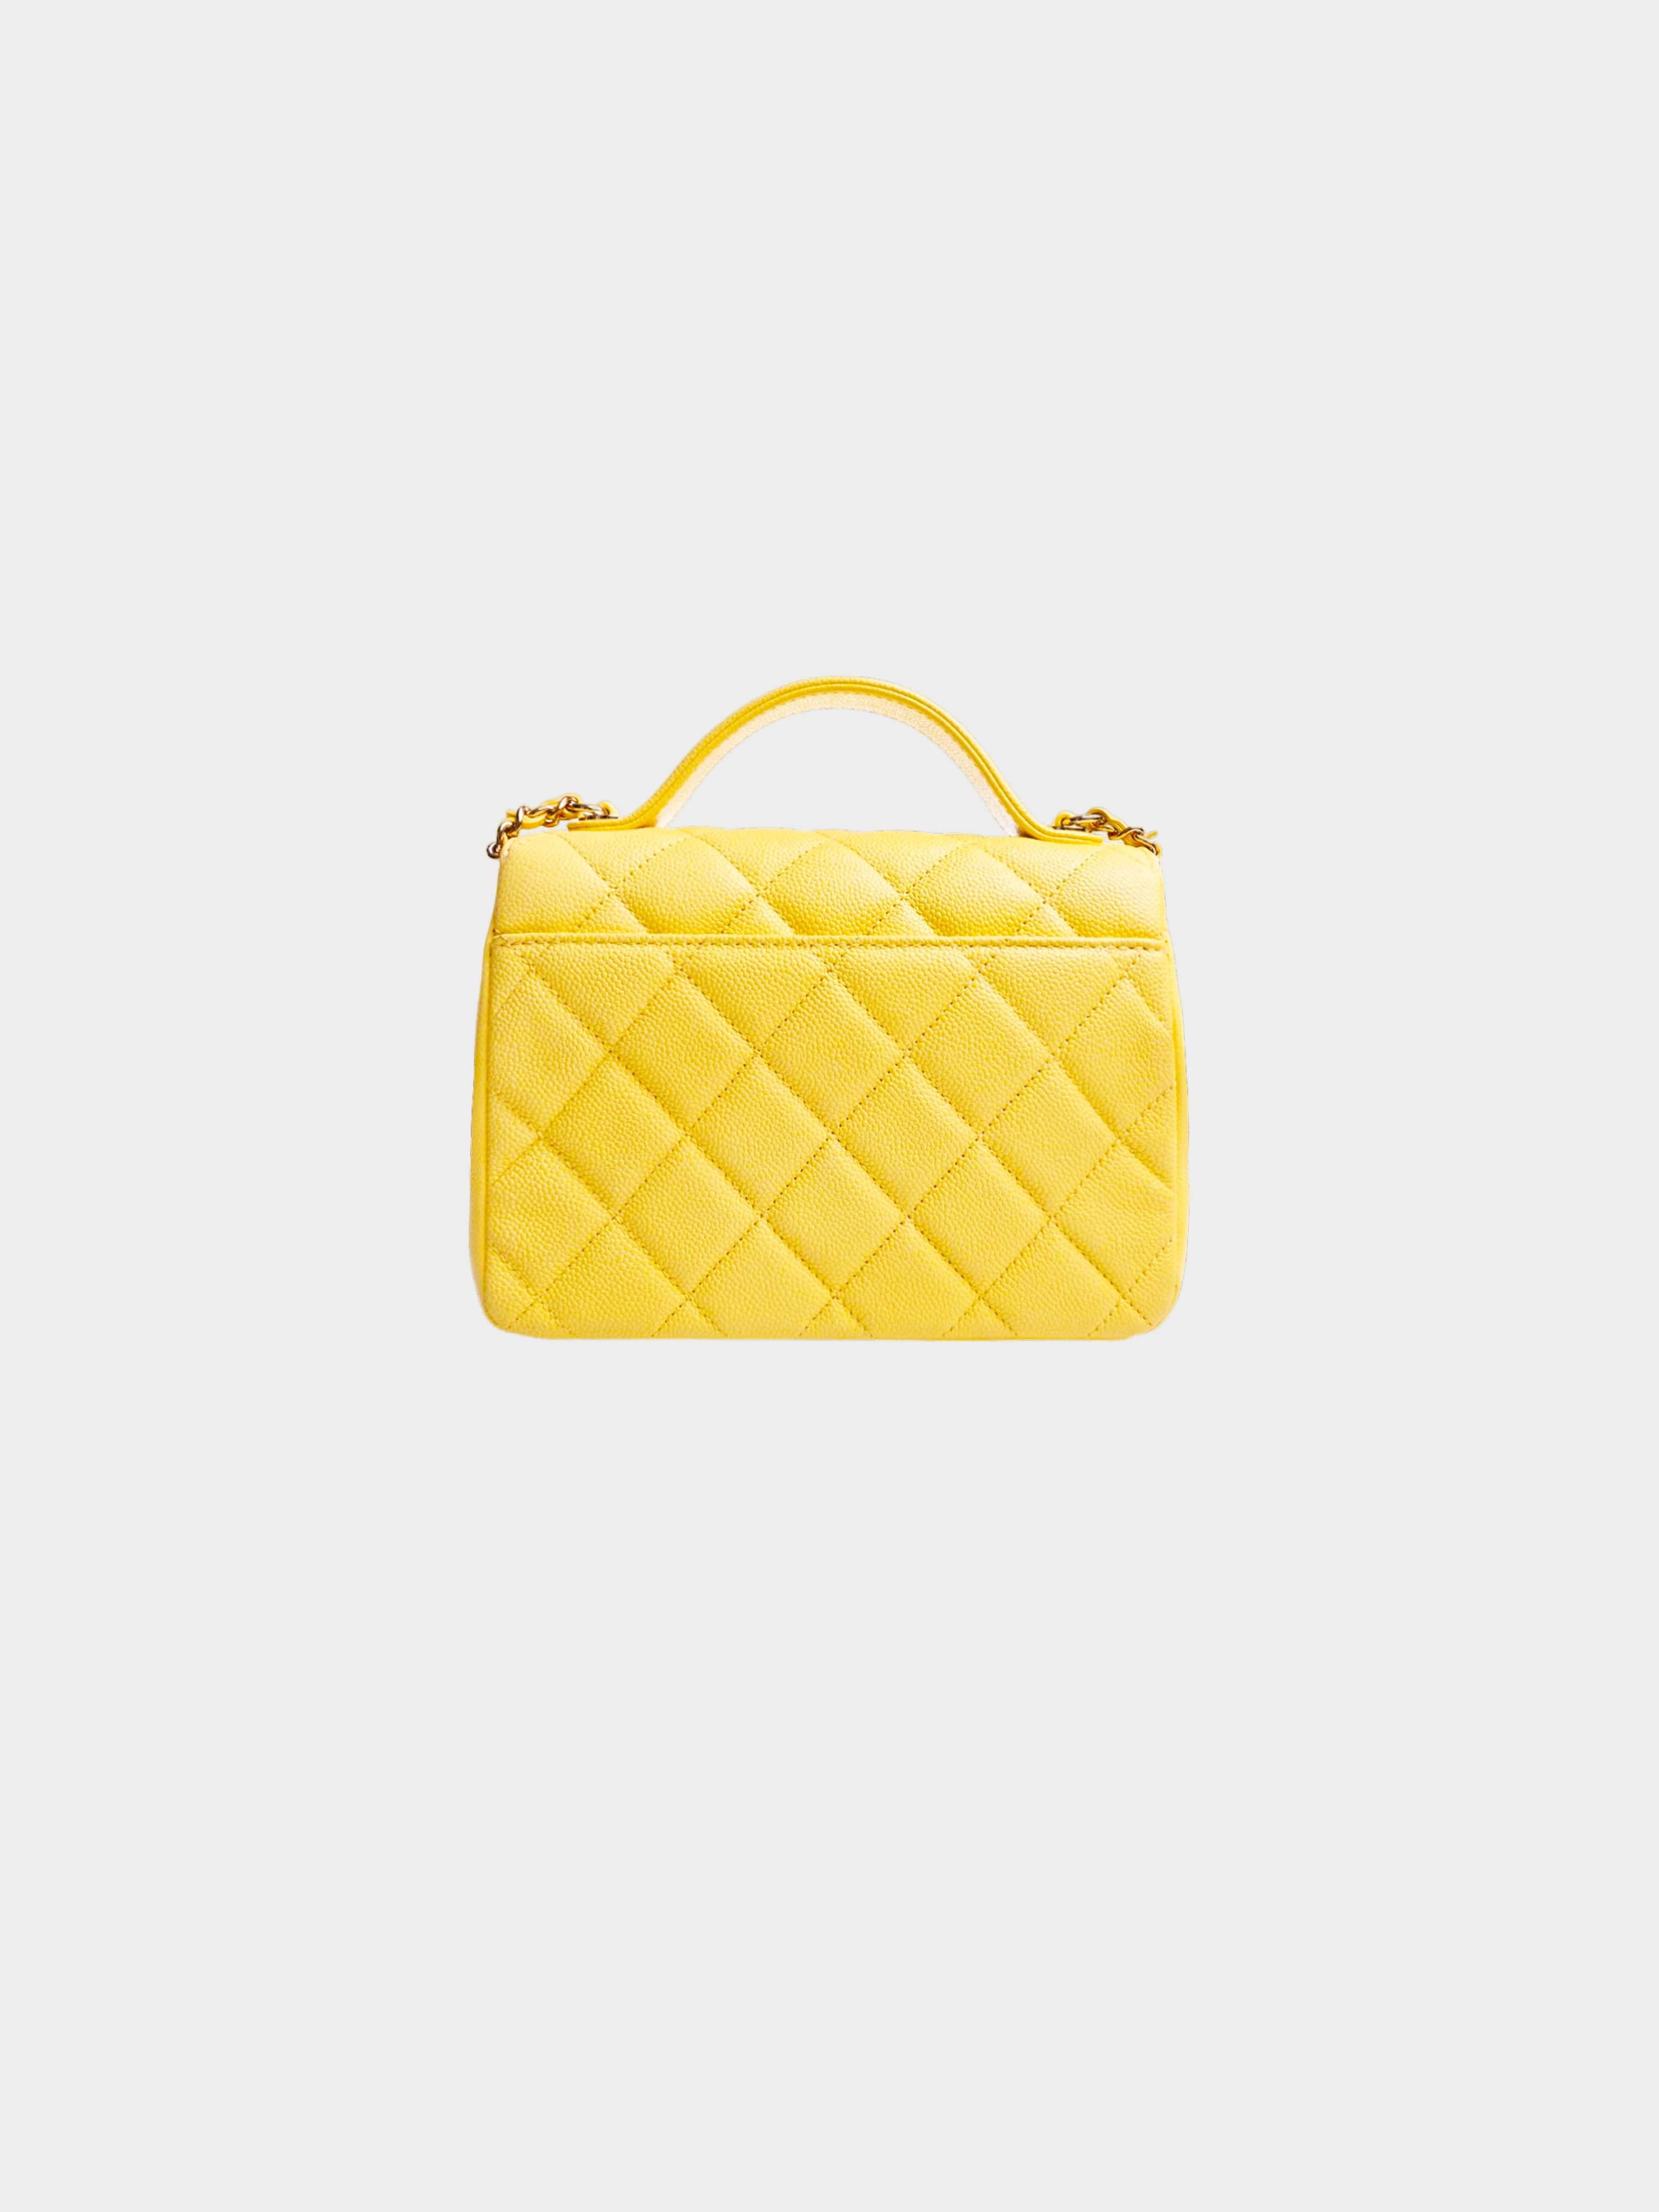 Designer Botteg Vena Quilted Tote Bag Large Woven Twist Handbag In Light  Yellow X Luxury Style From Watchesbagsco, $92.3 | DHgate.Com